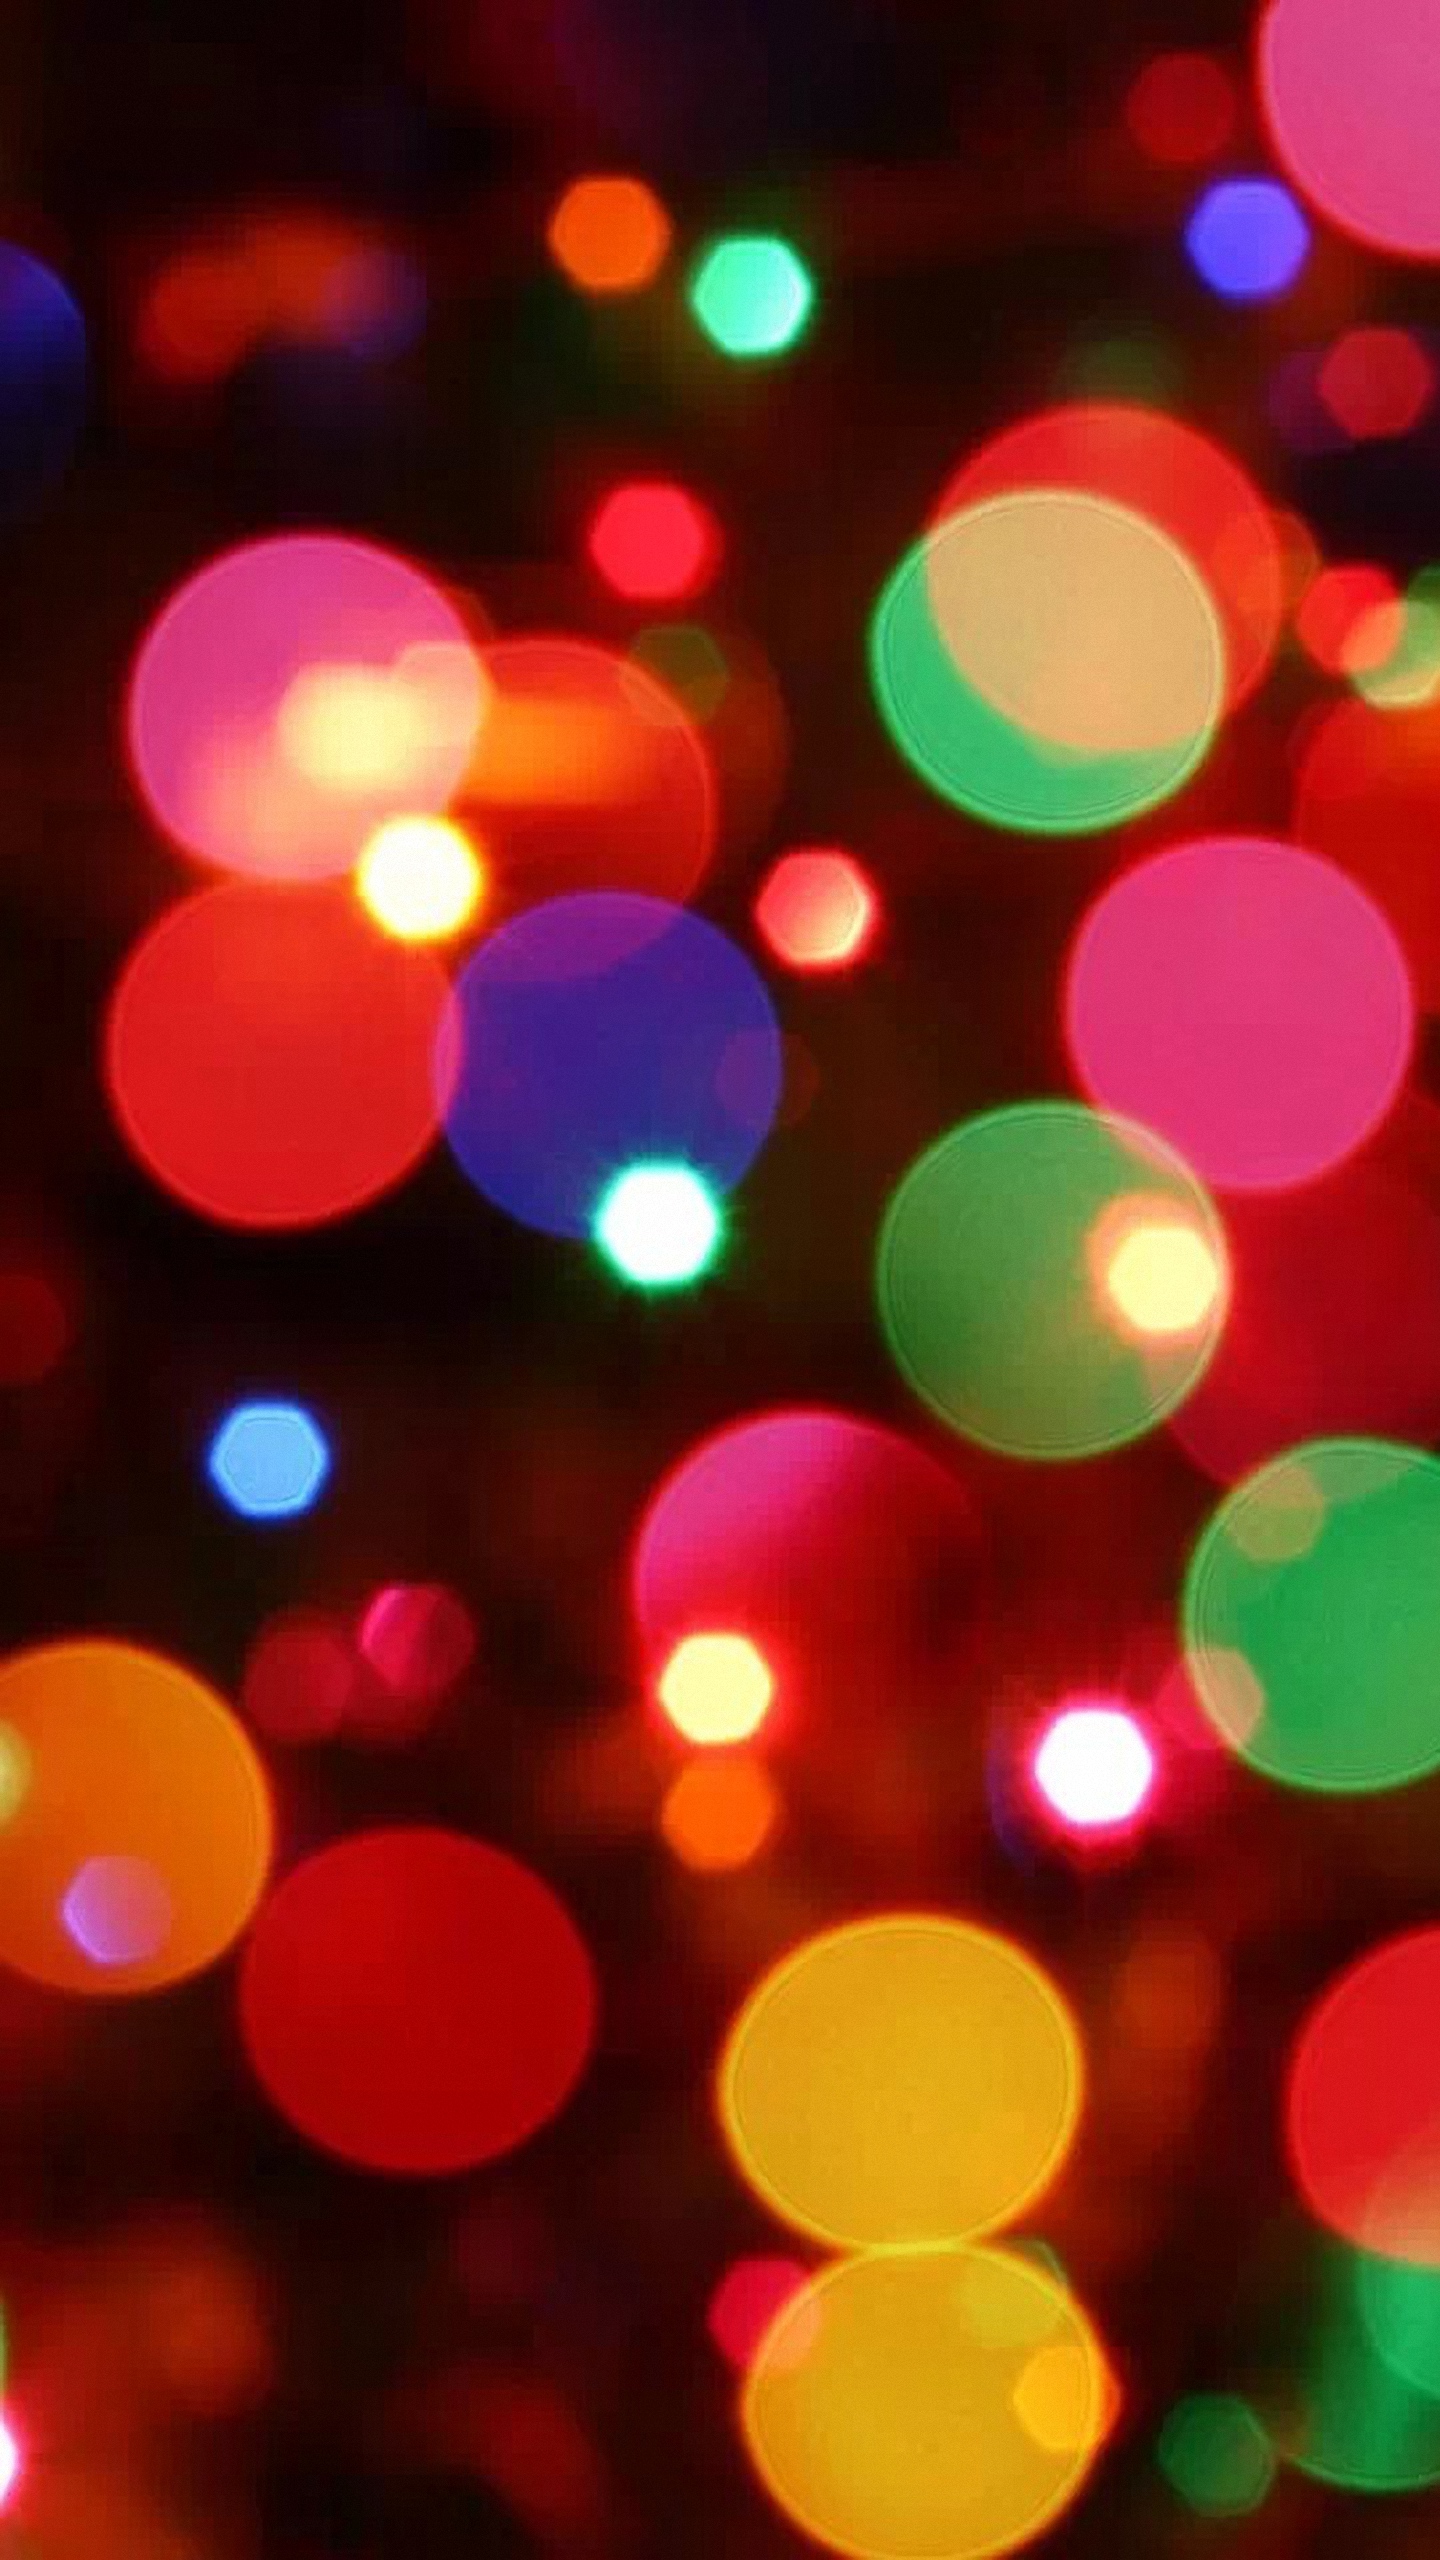 Free download lg g3 hd 1440x2560 colored lights bokeh lg g3 wallpapers  [1440x2560] for your Desktop, Mobile & Tablet | Explore 40+ LG G3 Wallpaper  1440x2560 | LG G3 Wallpaper, Free LG